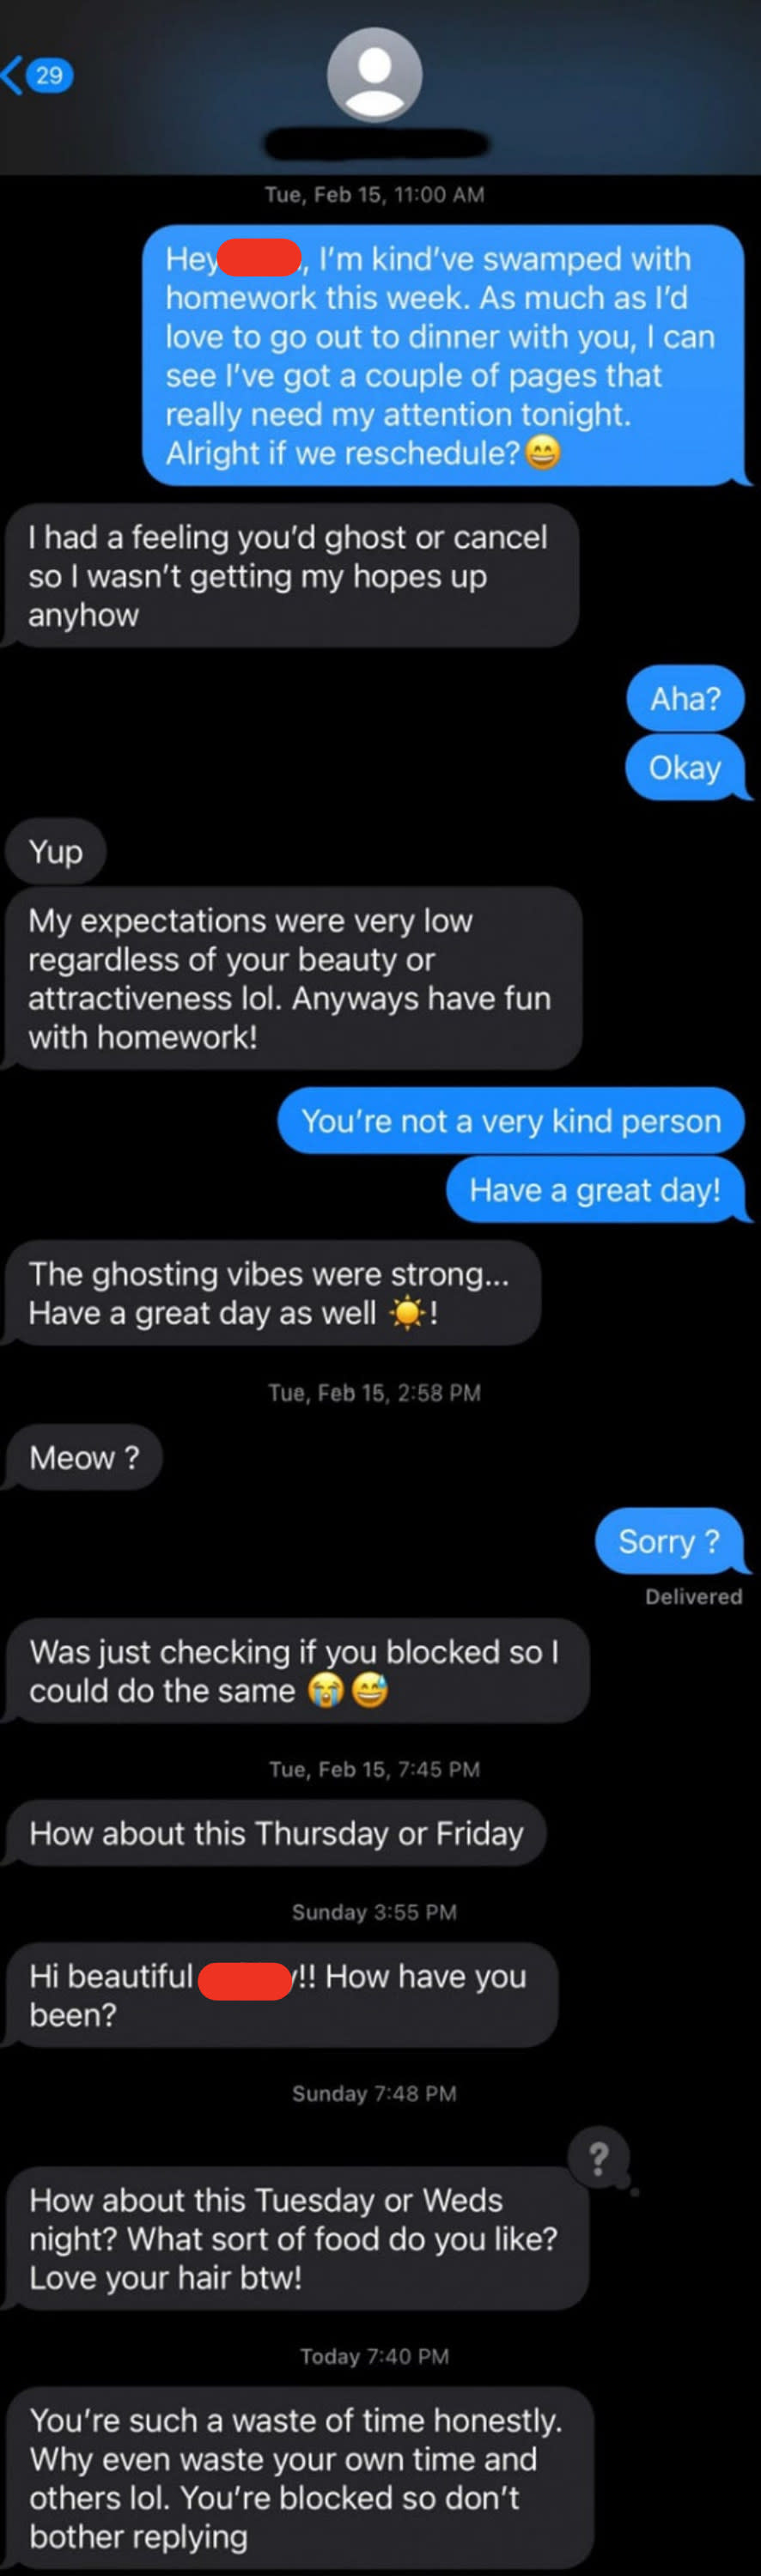 The woman says she has homework so needs to reschedule, the man says he was expecting her to ghost him, she calls him mean, he says he's blocking her, then he asks her out again days later